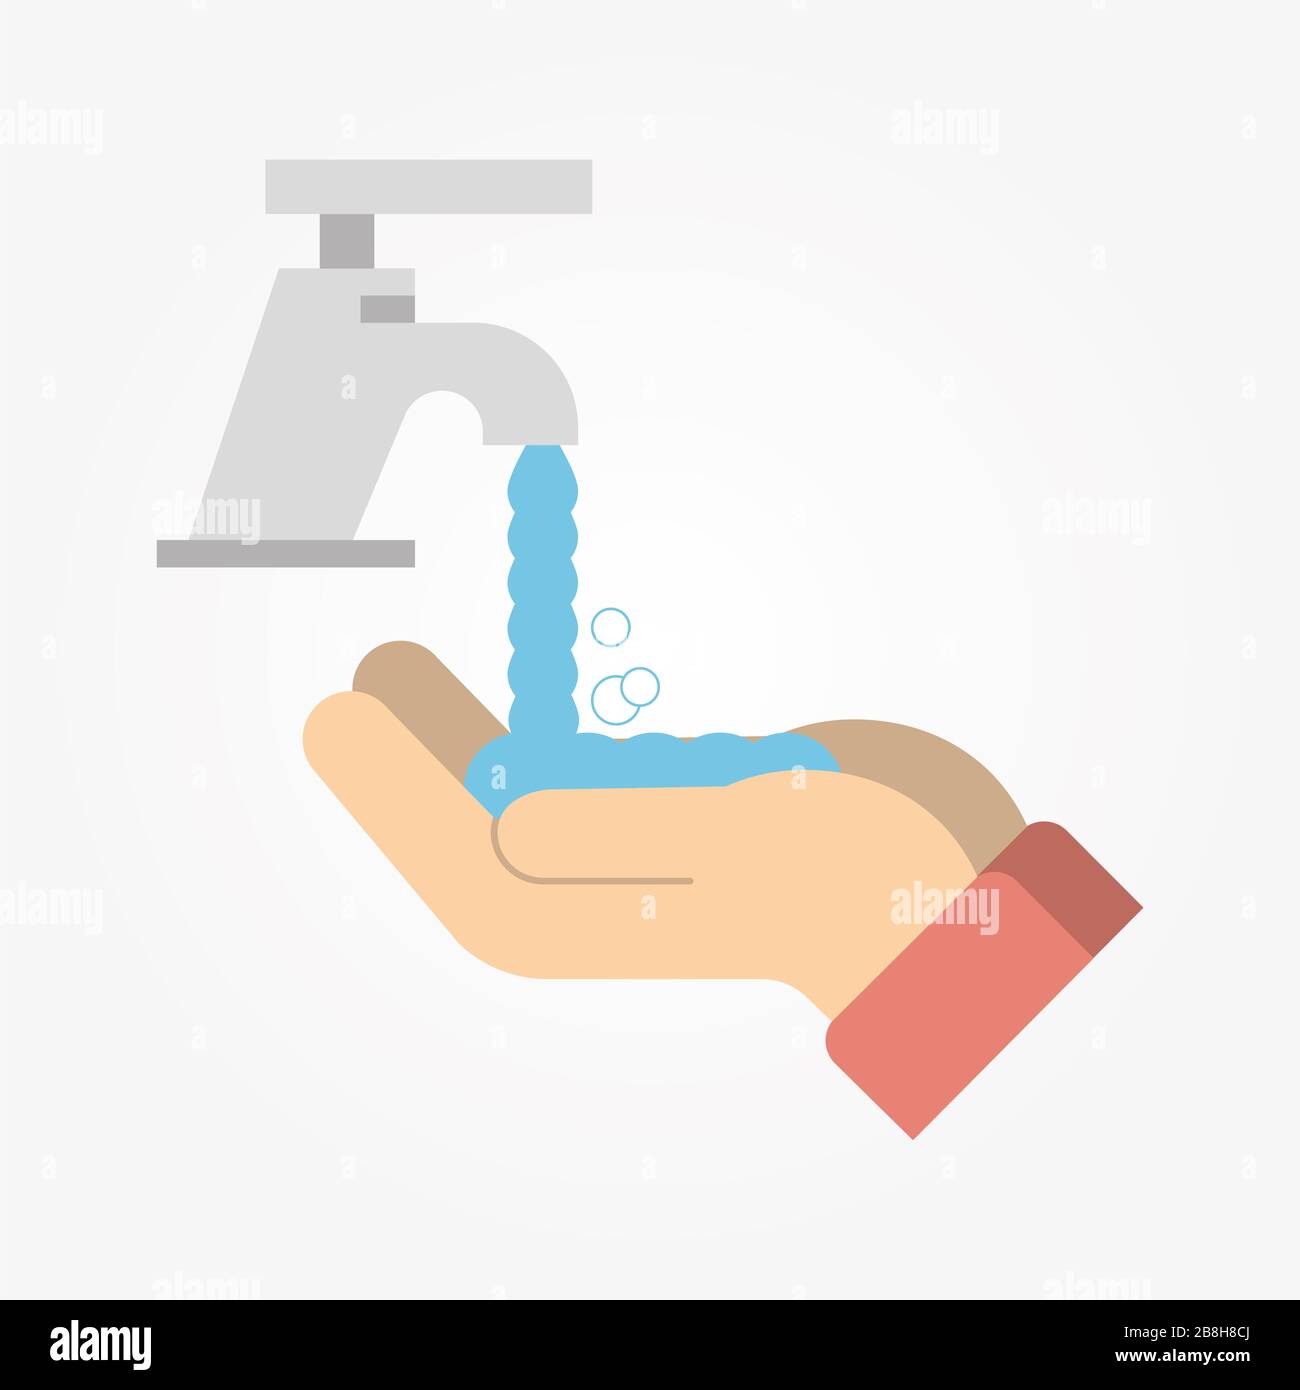 Wash / disinfect / sanitize your hands regularly and thoroughly for a good hygiene and health and to avoid infection with a virus. Stock Photo